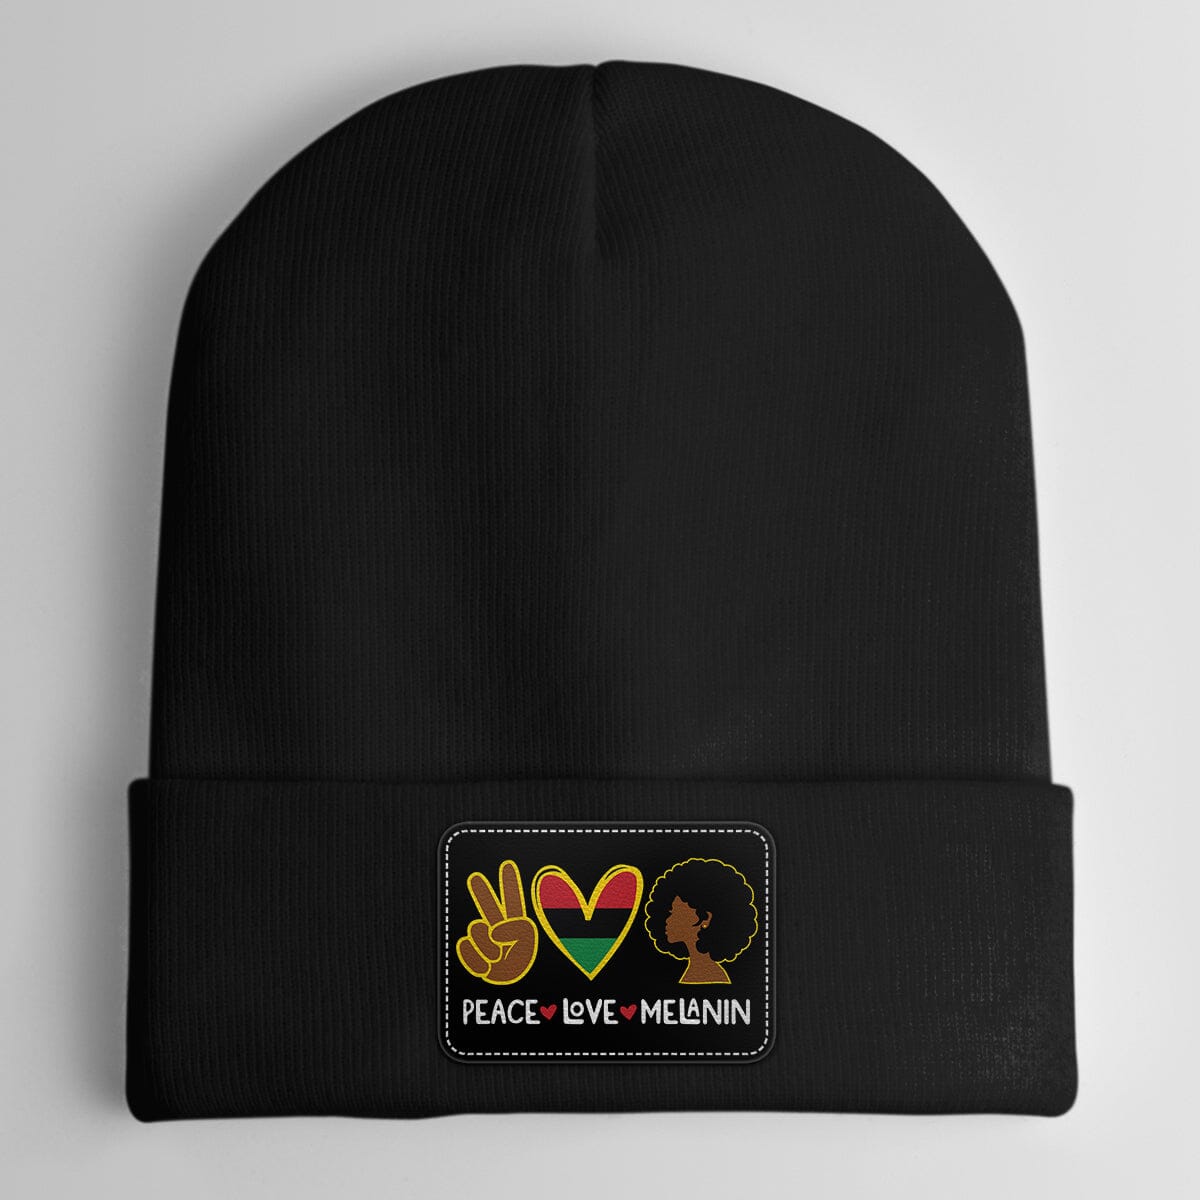 Peace Love Melanin Leather Patch Beanie Hat Leather Patch Beanie Hat CustomCat Black Patch Black 